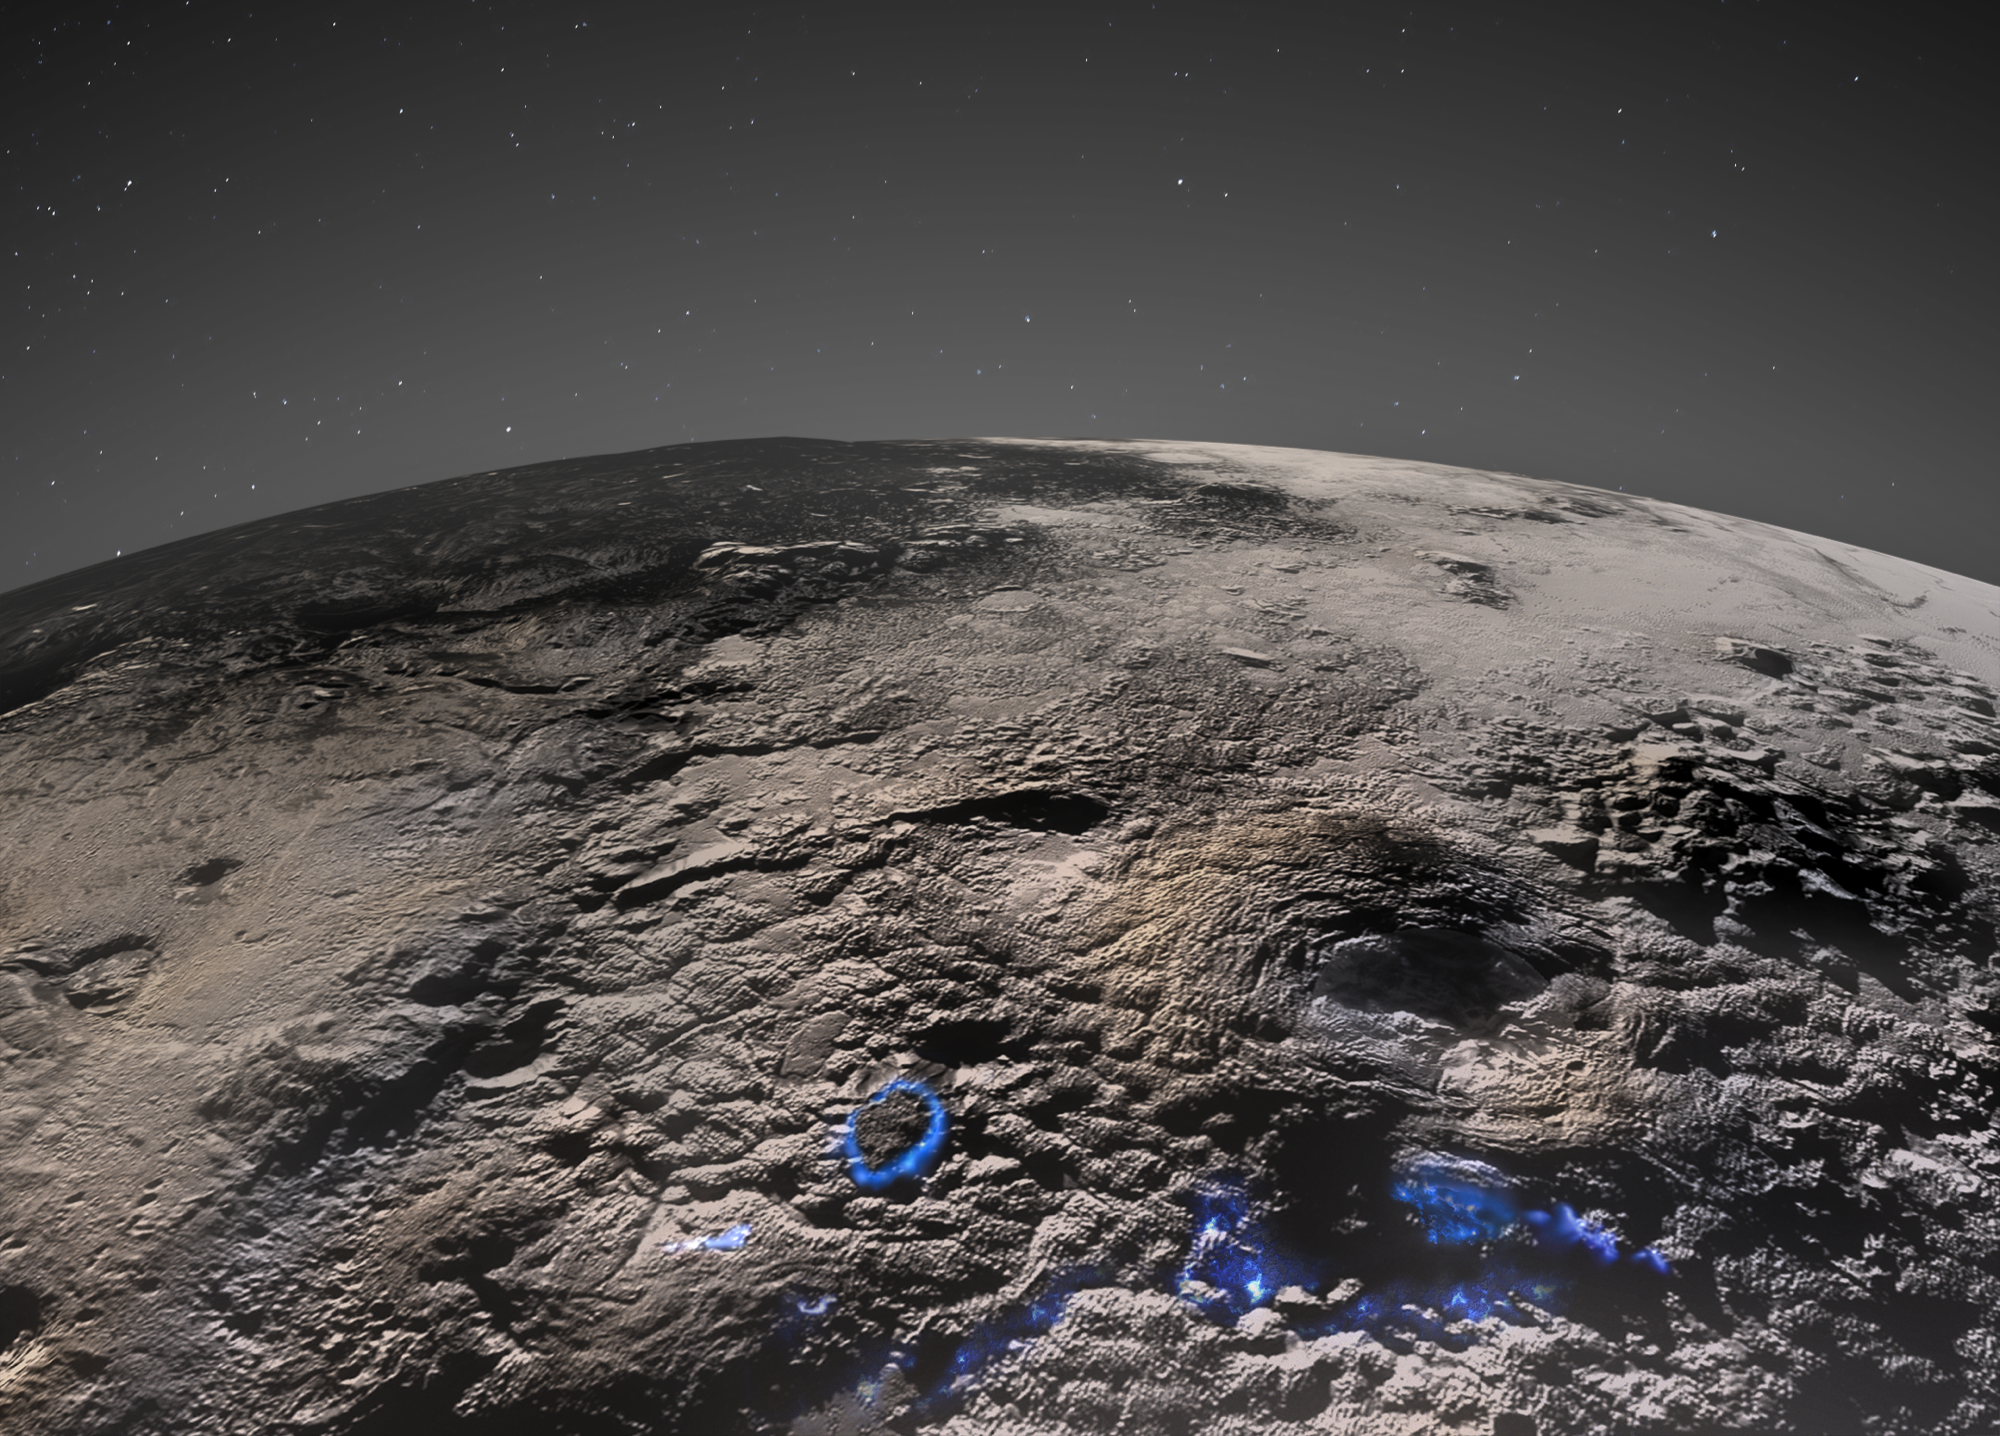 Pluto’s icy volcanoes may have once belched ‘antifreeze lava’